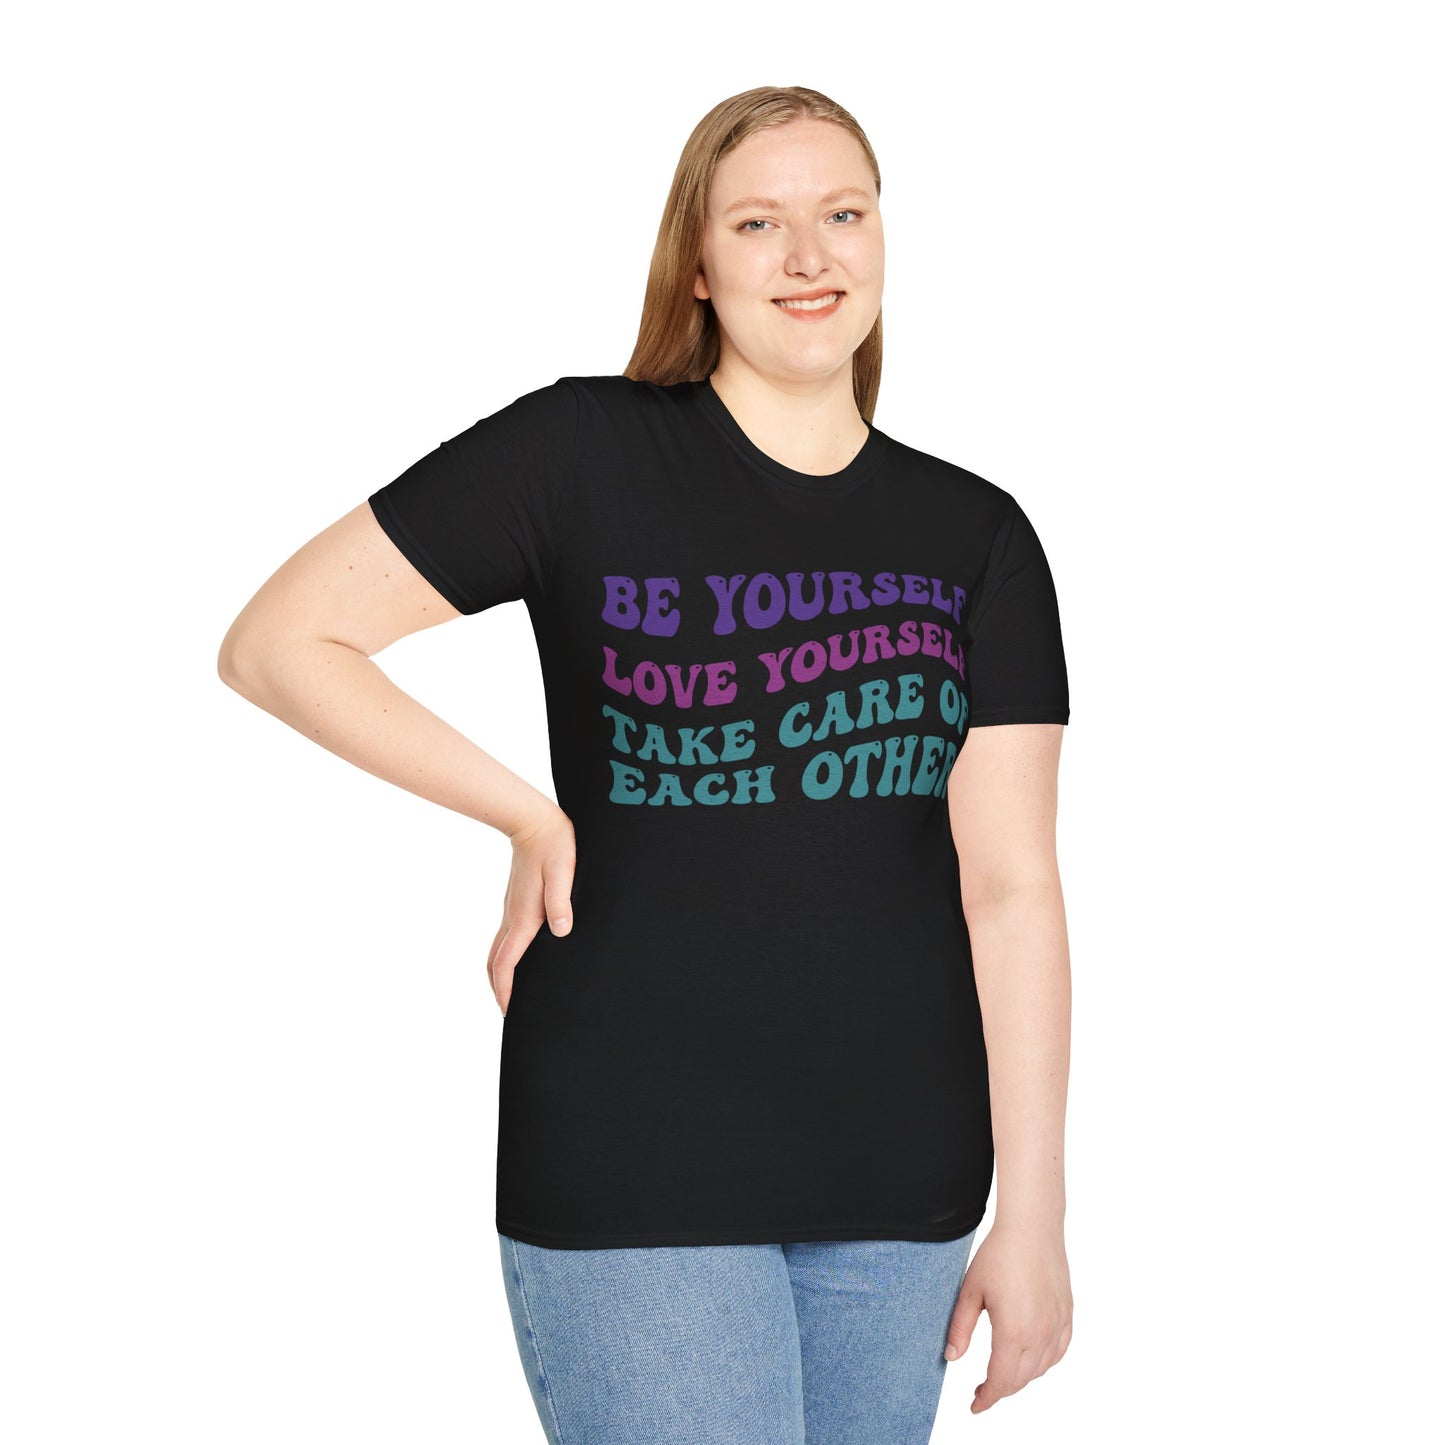 Be Yourself, Love Yourself, Take Care of Each Other Softstyle T-Shirt, Funky Retro Tee, Gift for Nice People